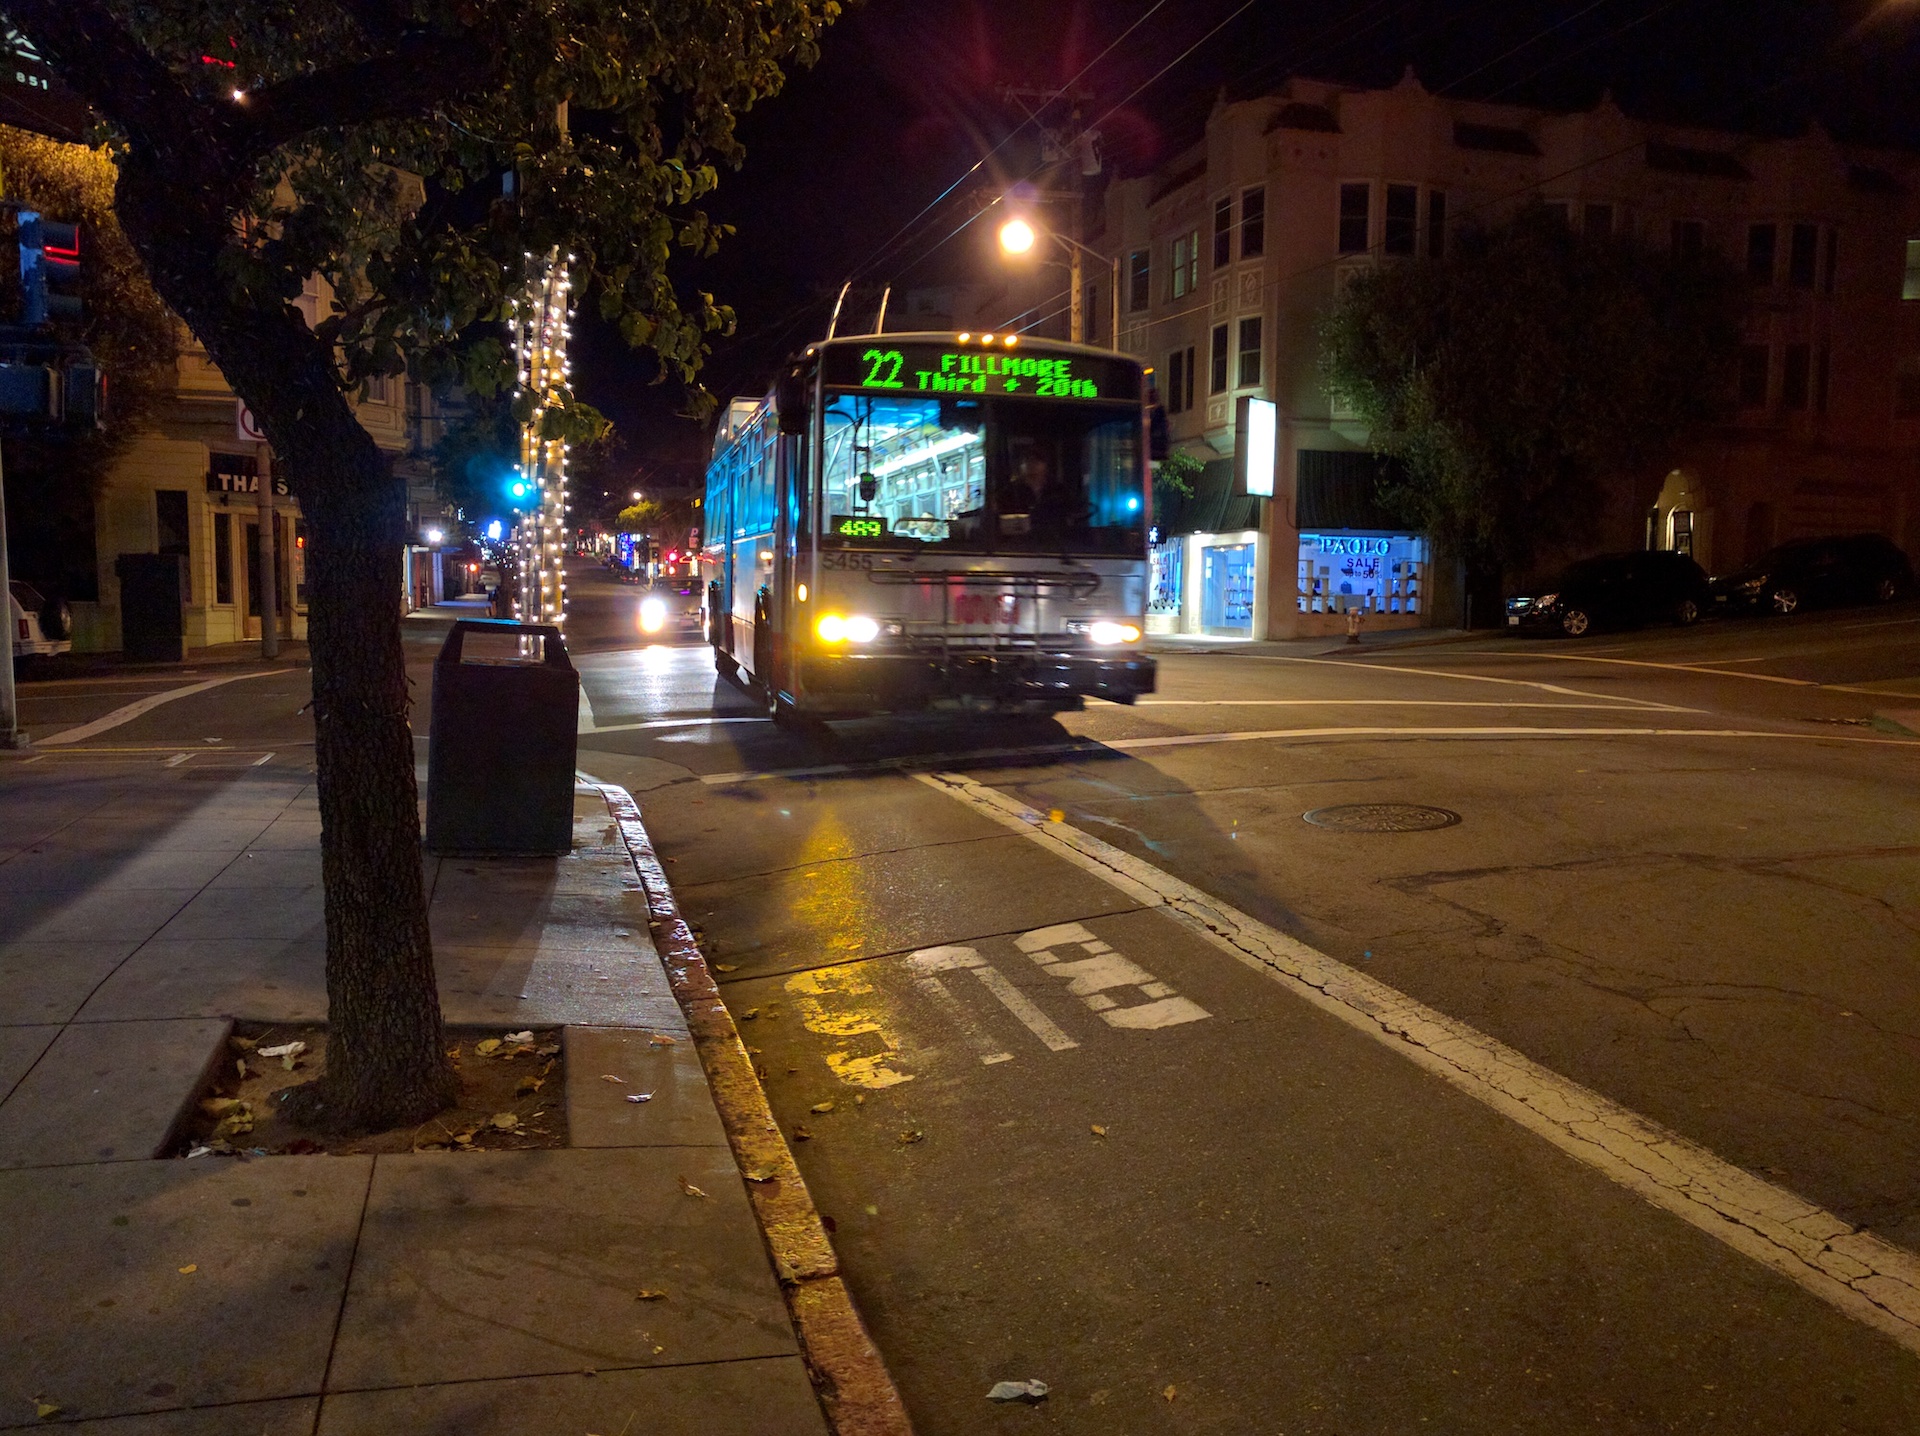 The 22-Fillmore bus in Pacific Heights, San Francisco